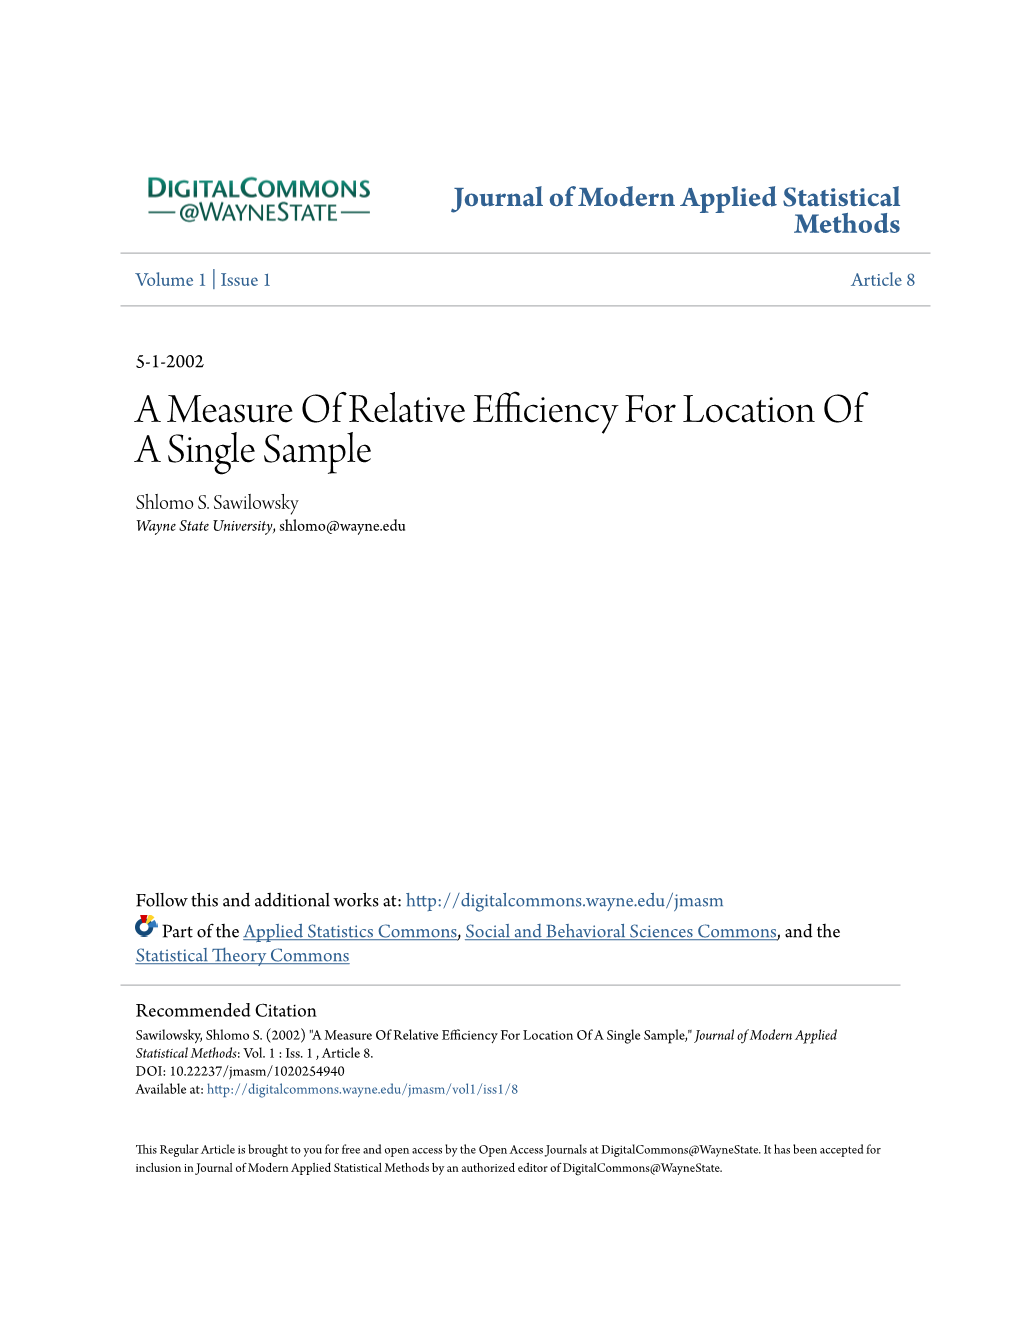 A Measure of Relative Efficiency for Location of a Single Sample Shlomo S